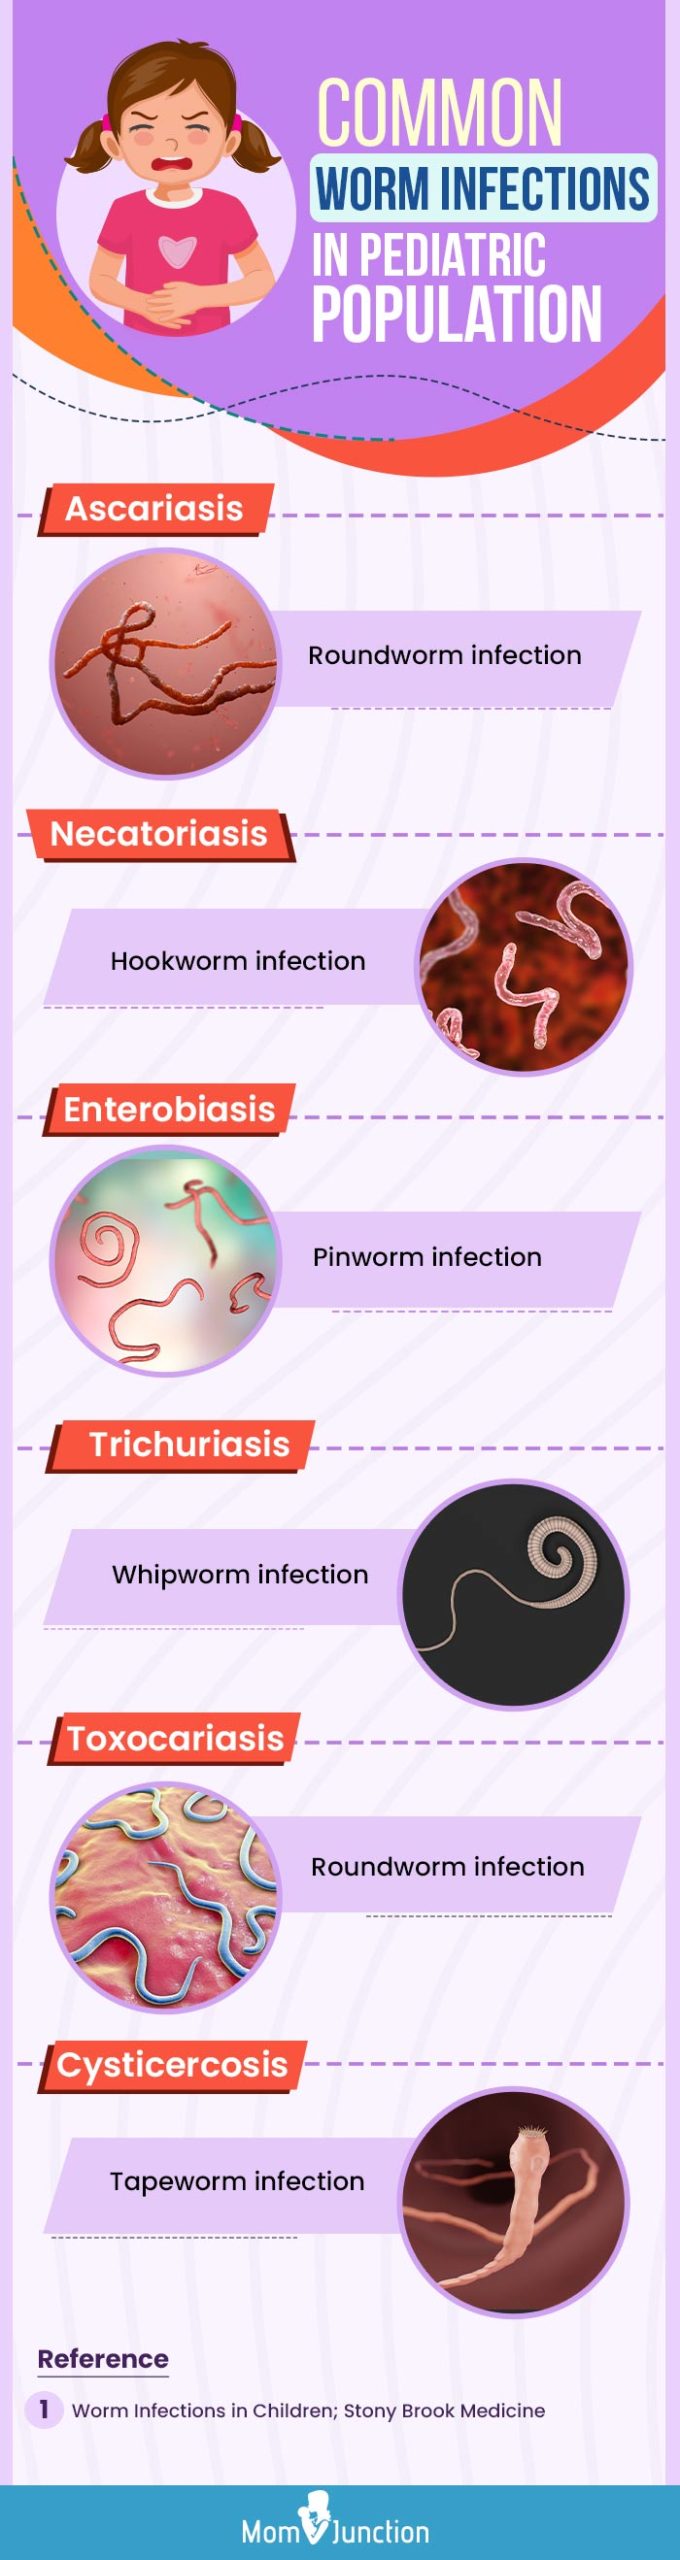 types of stomach worms in humans